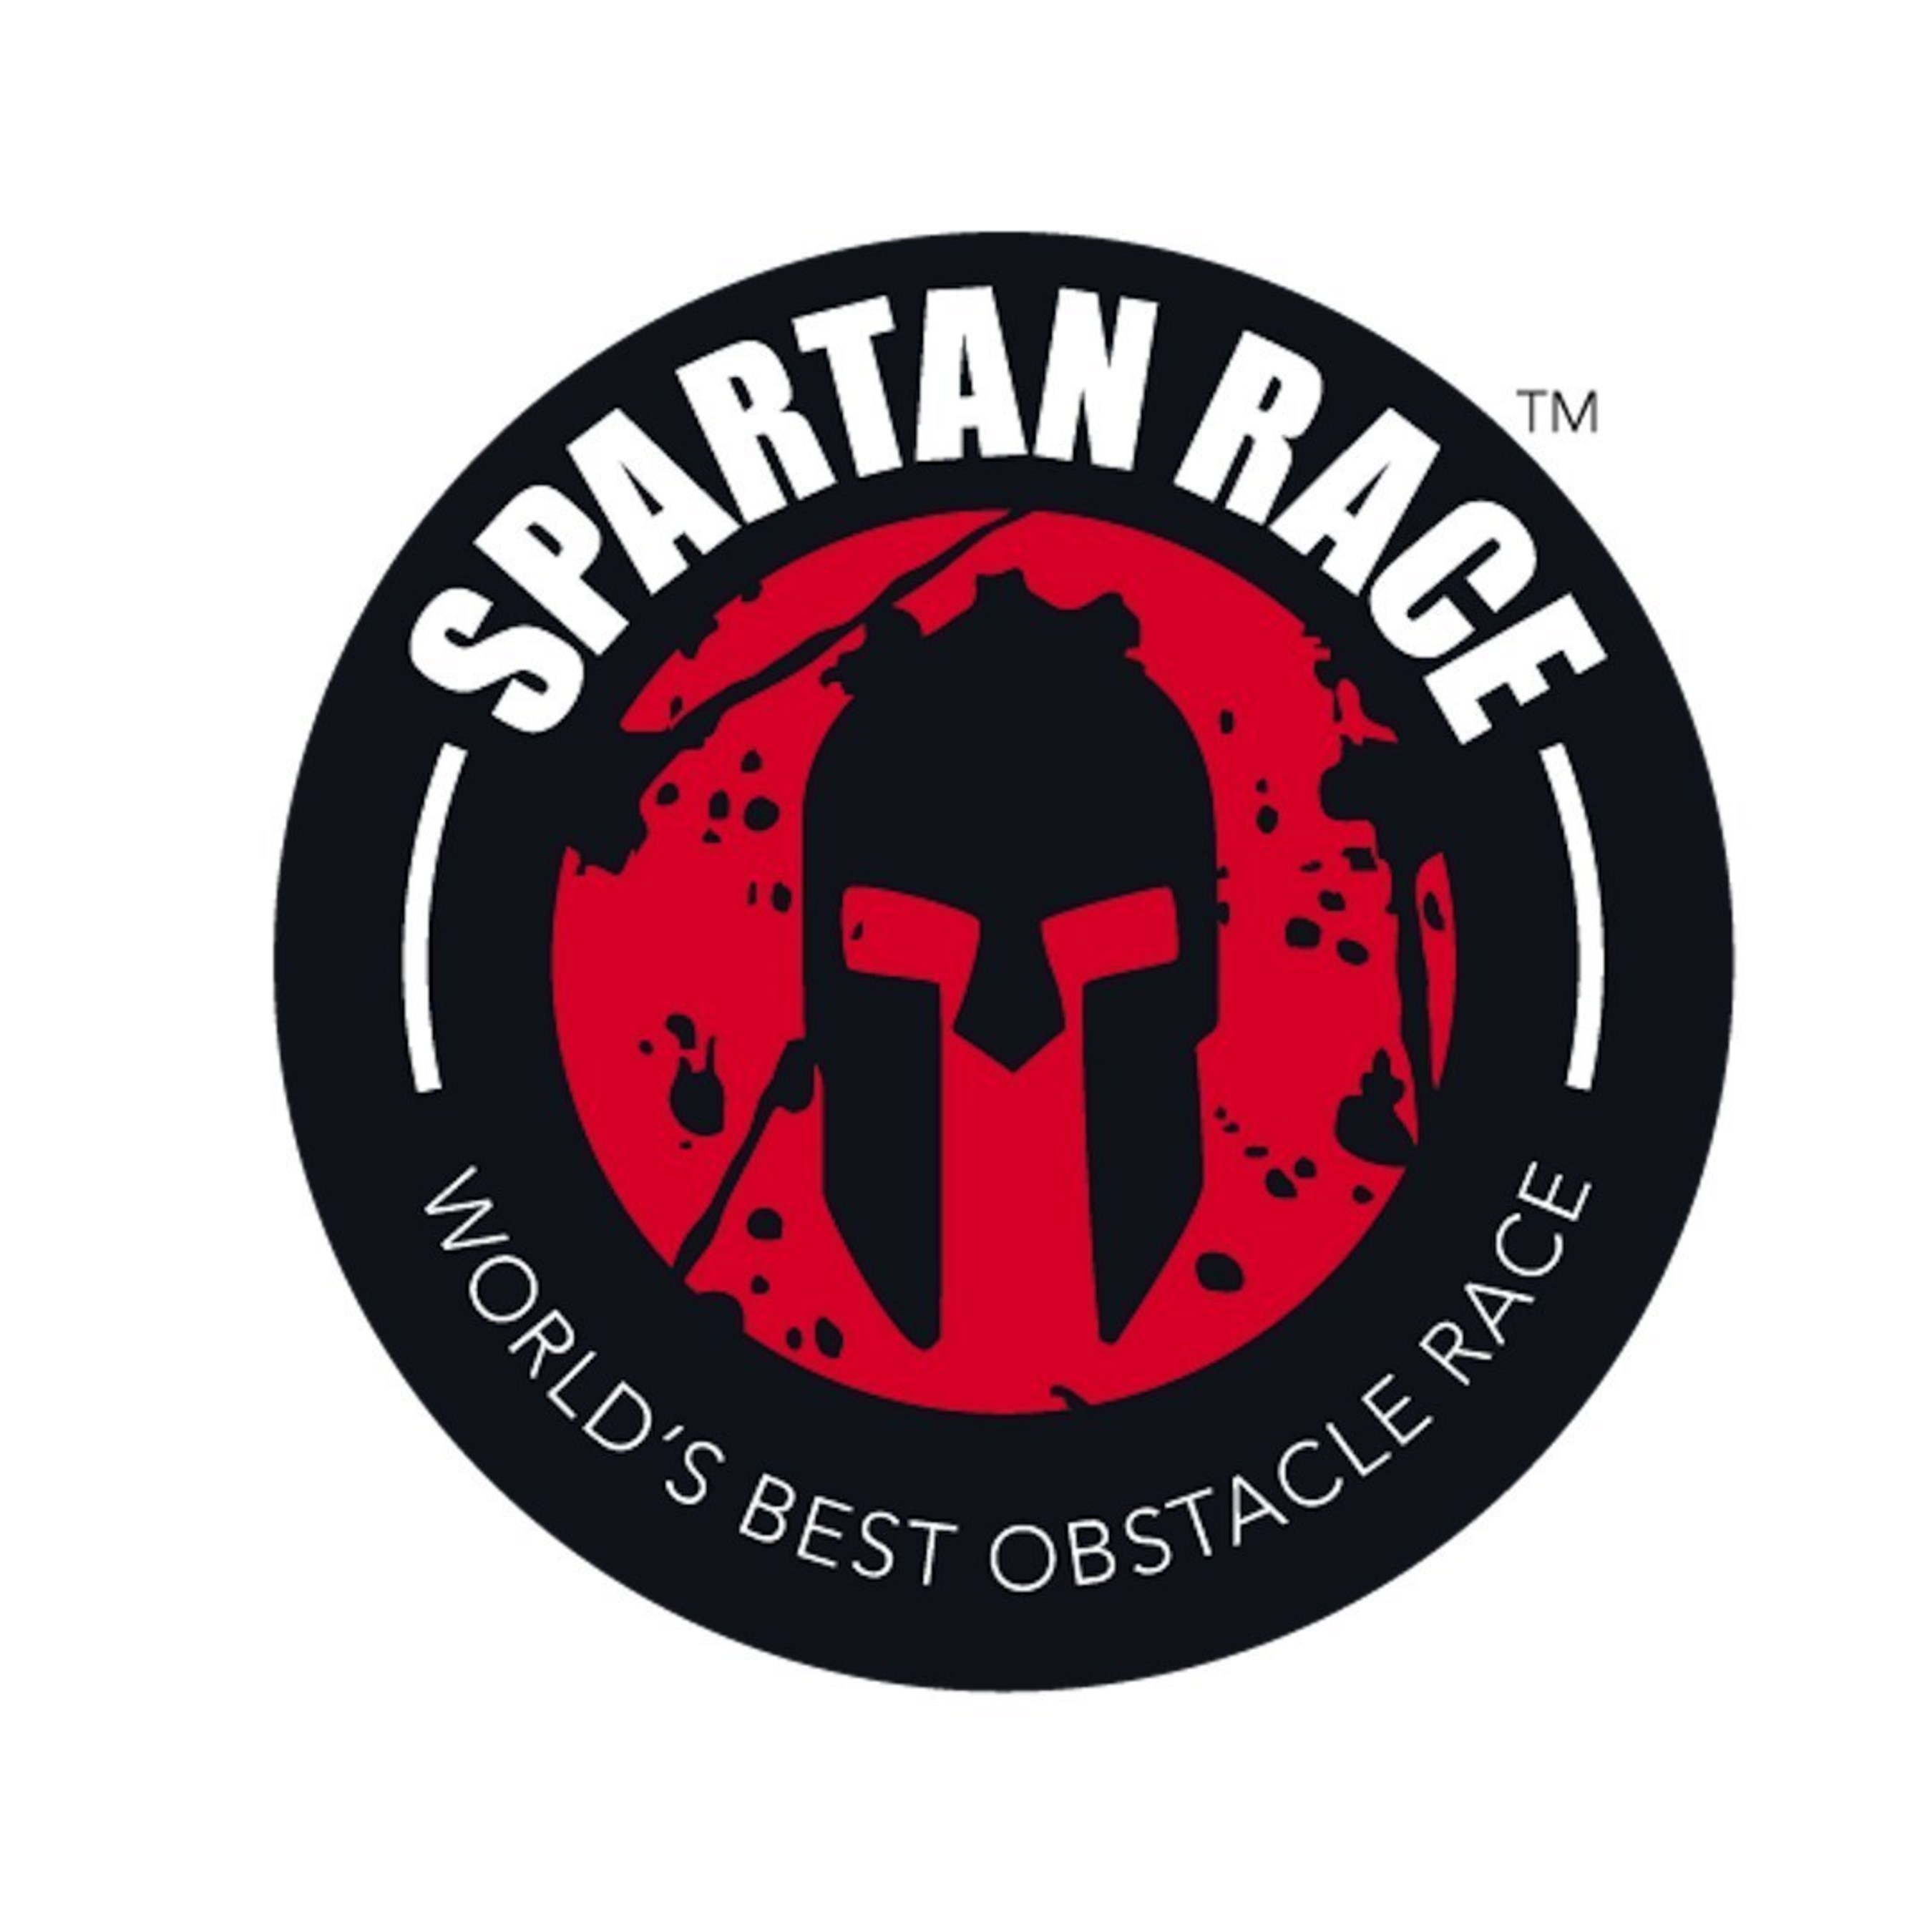 Spartan Race Announces Strategic Investment By Hearst